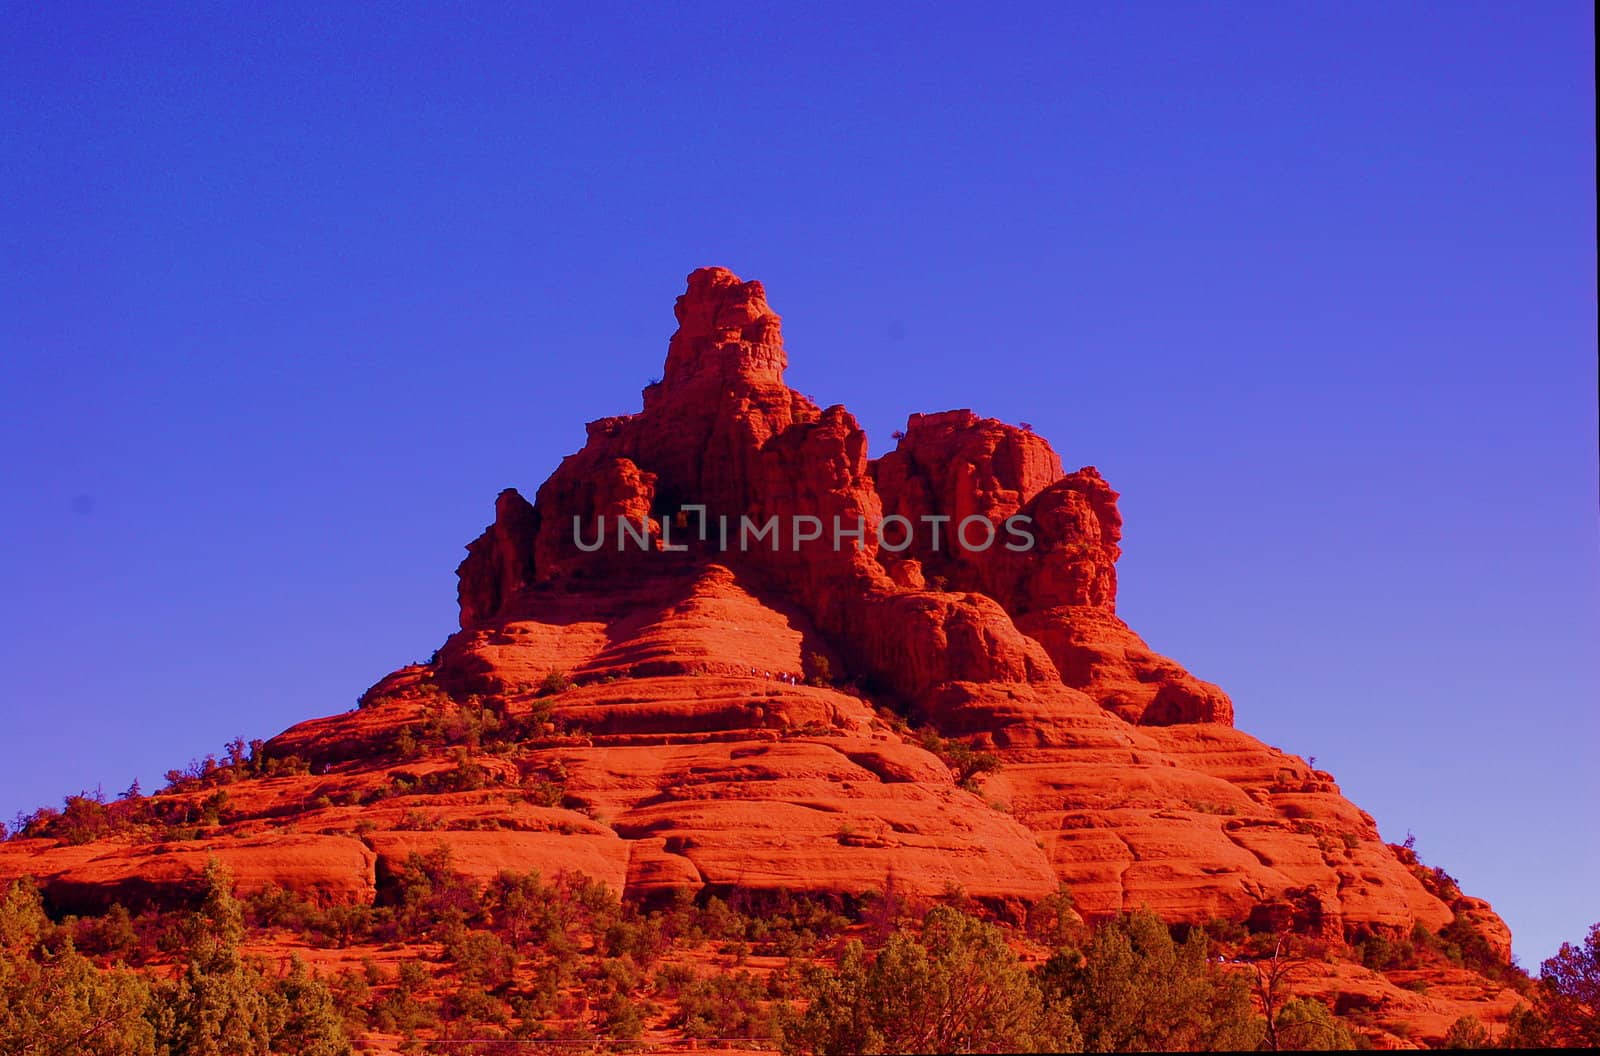 Red Rock of Sedona against a blue sky